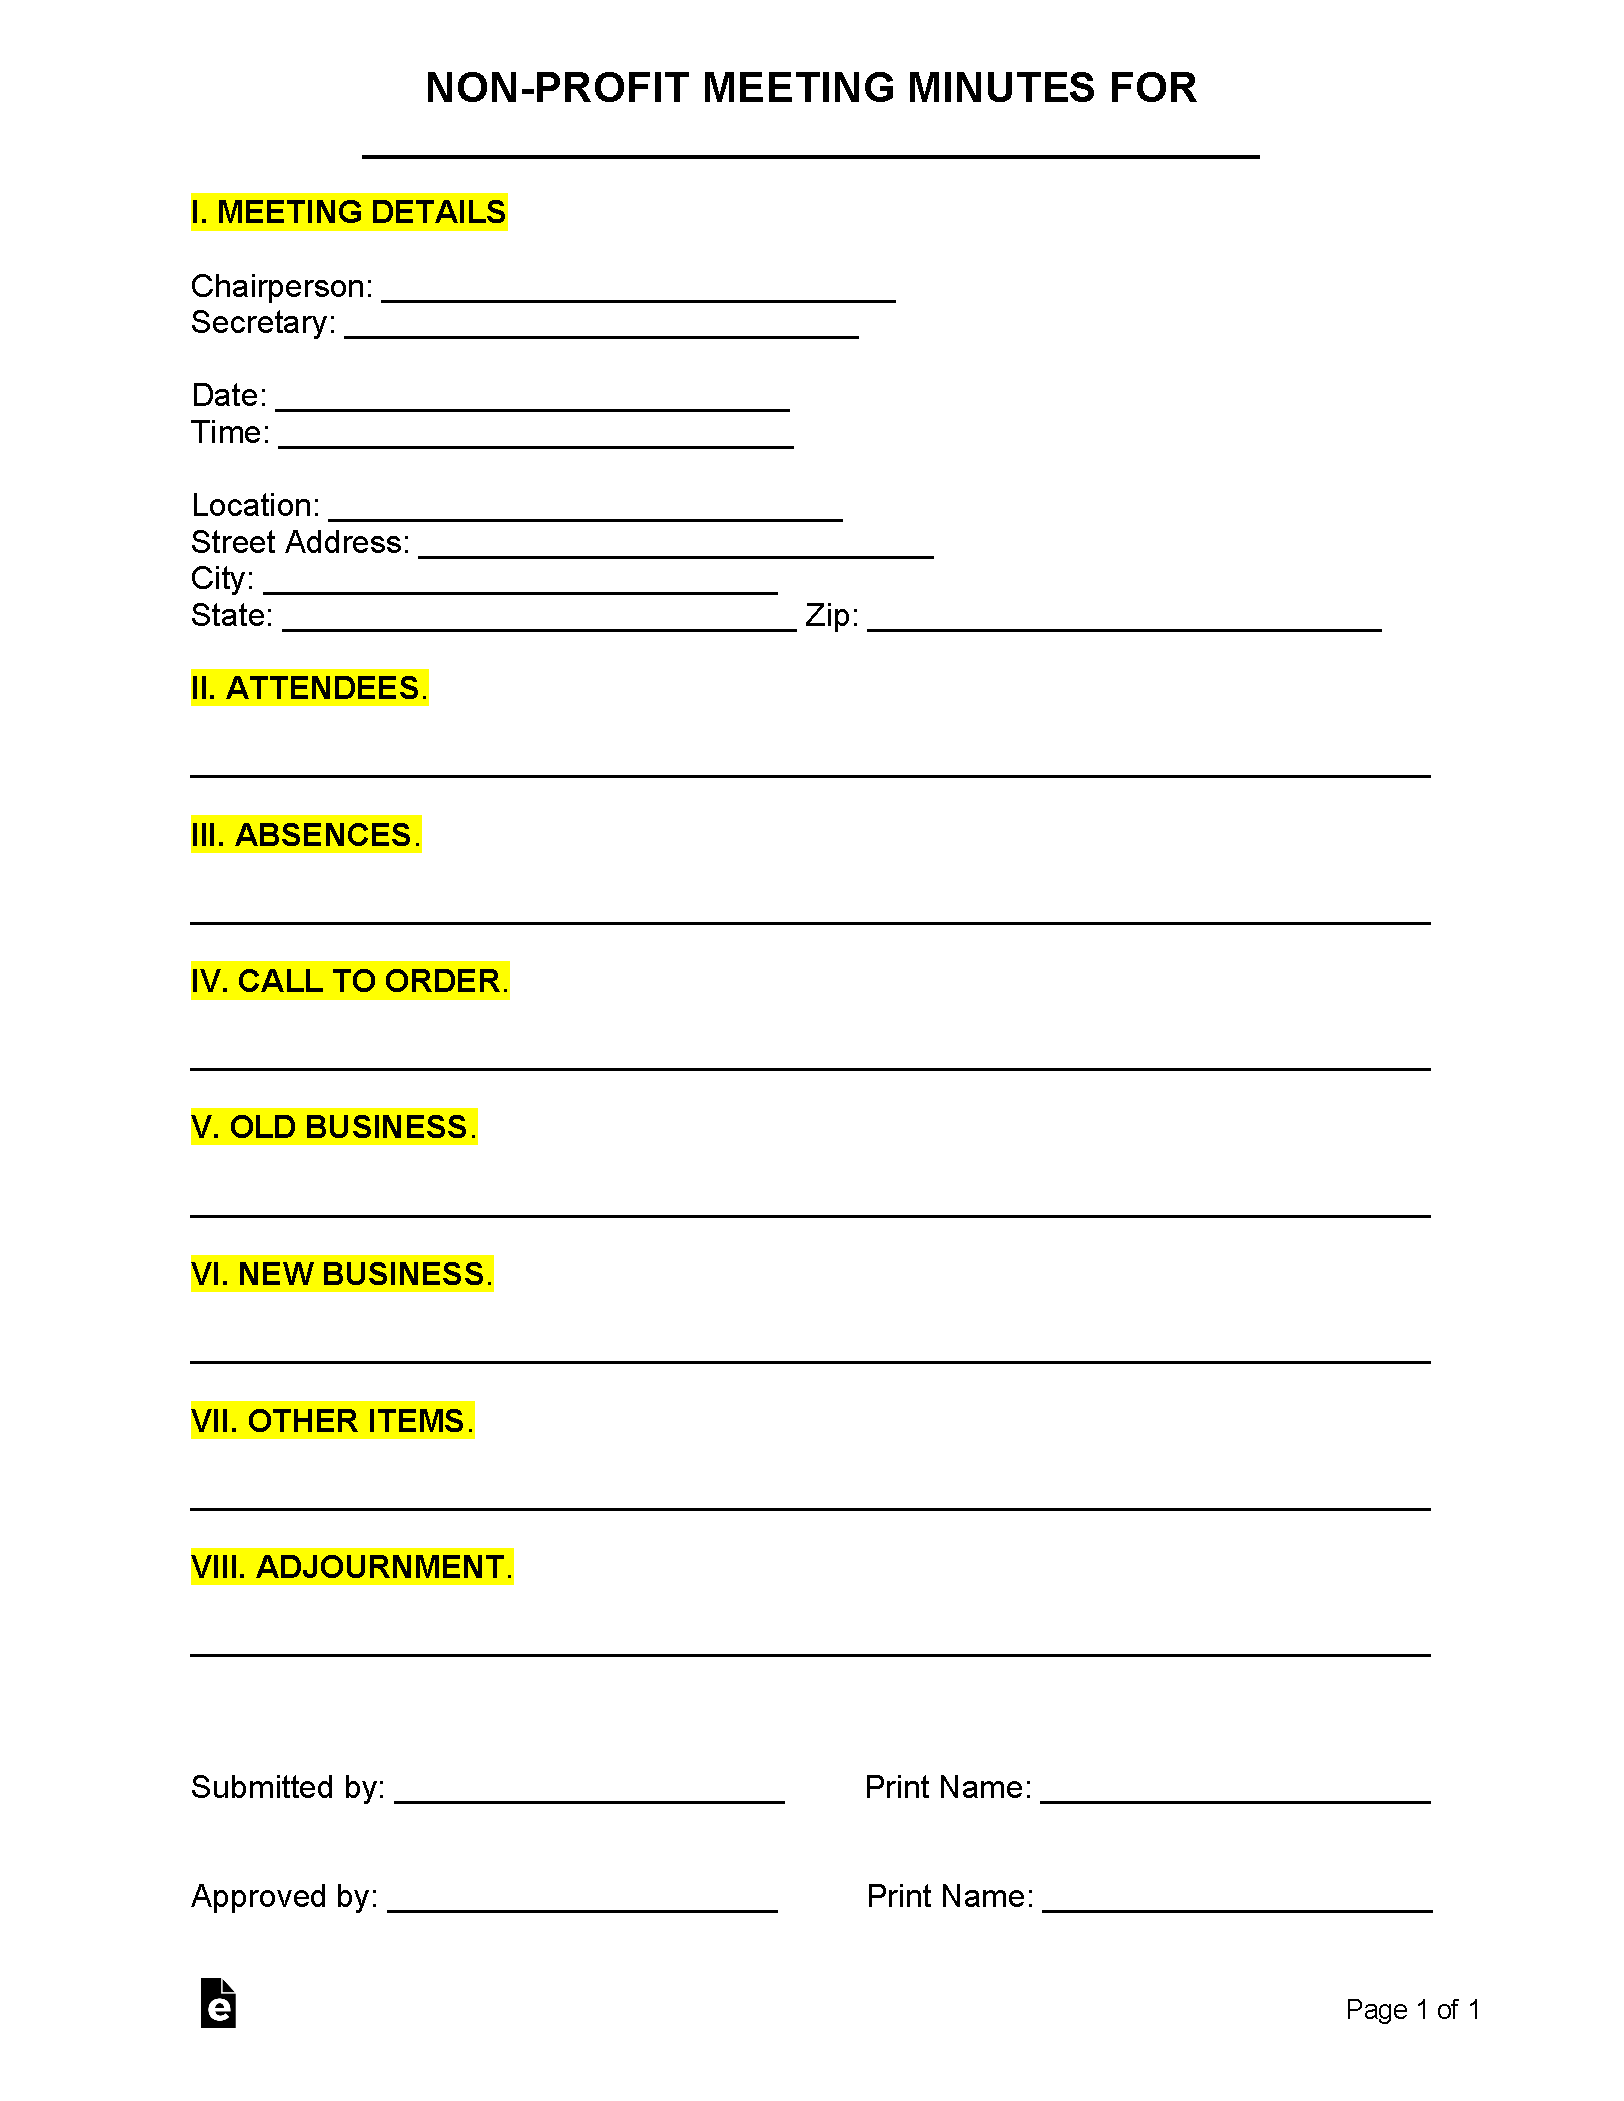 corporate-meeting-minutes-template-10-free-word-excel-pdf-format